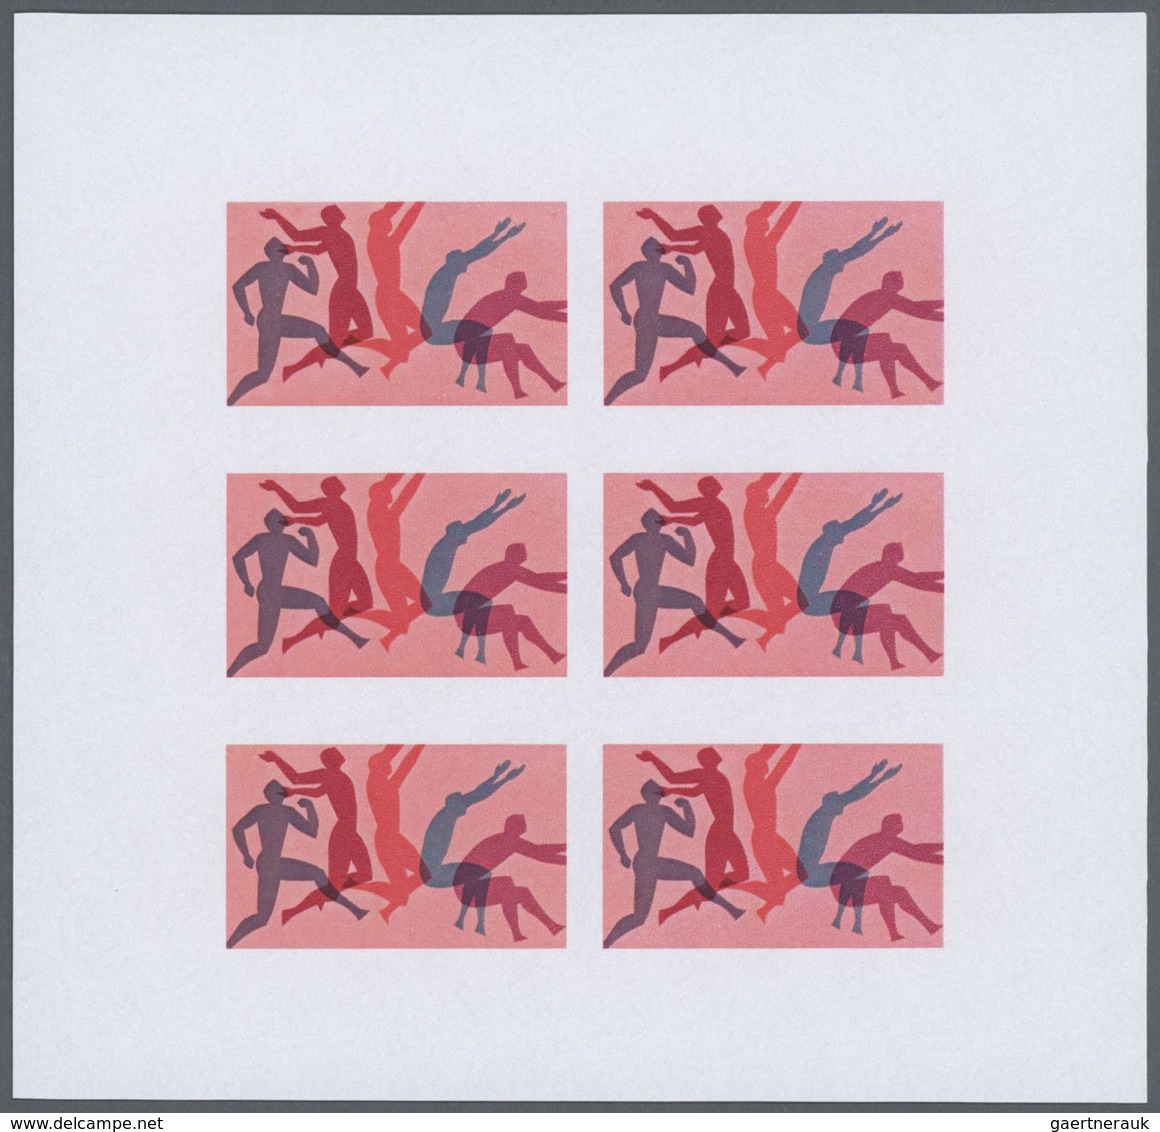 Thematik: Olympische Spiele / olympic games: 1976, Penrhyn. Progressive proofs set of sheets for the